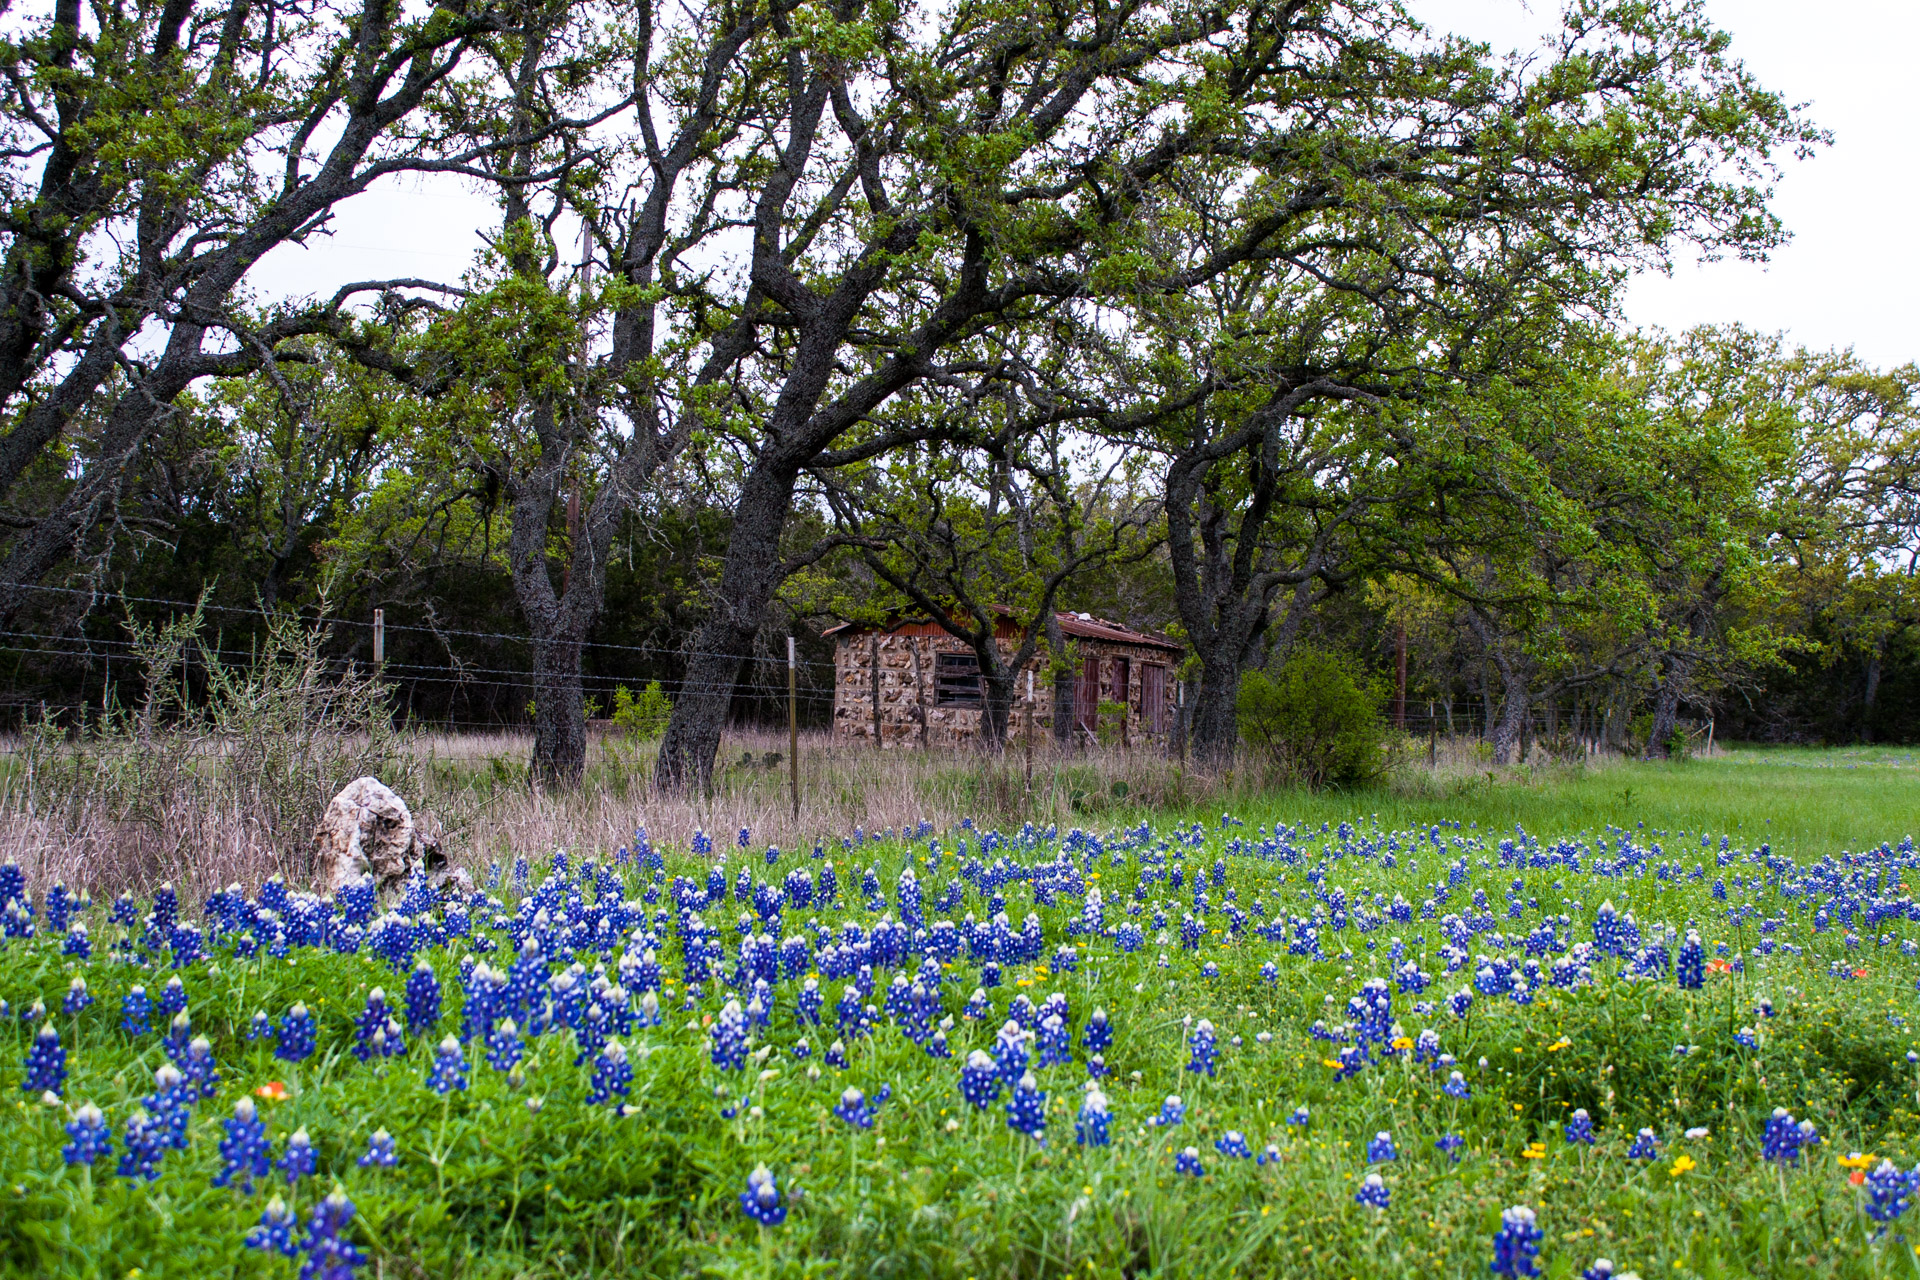 Burnet, Texas - A Red Stone Cottage With Bluebonnets (side far)